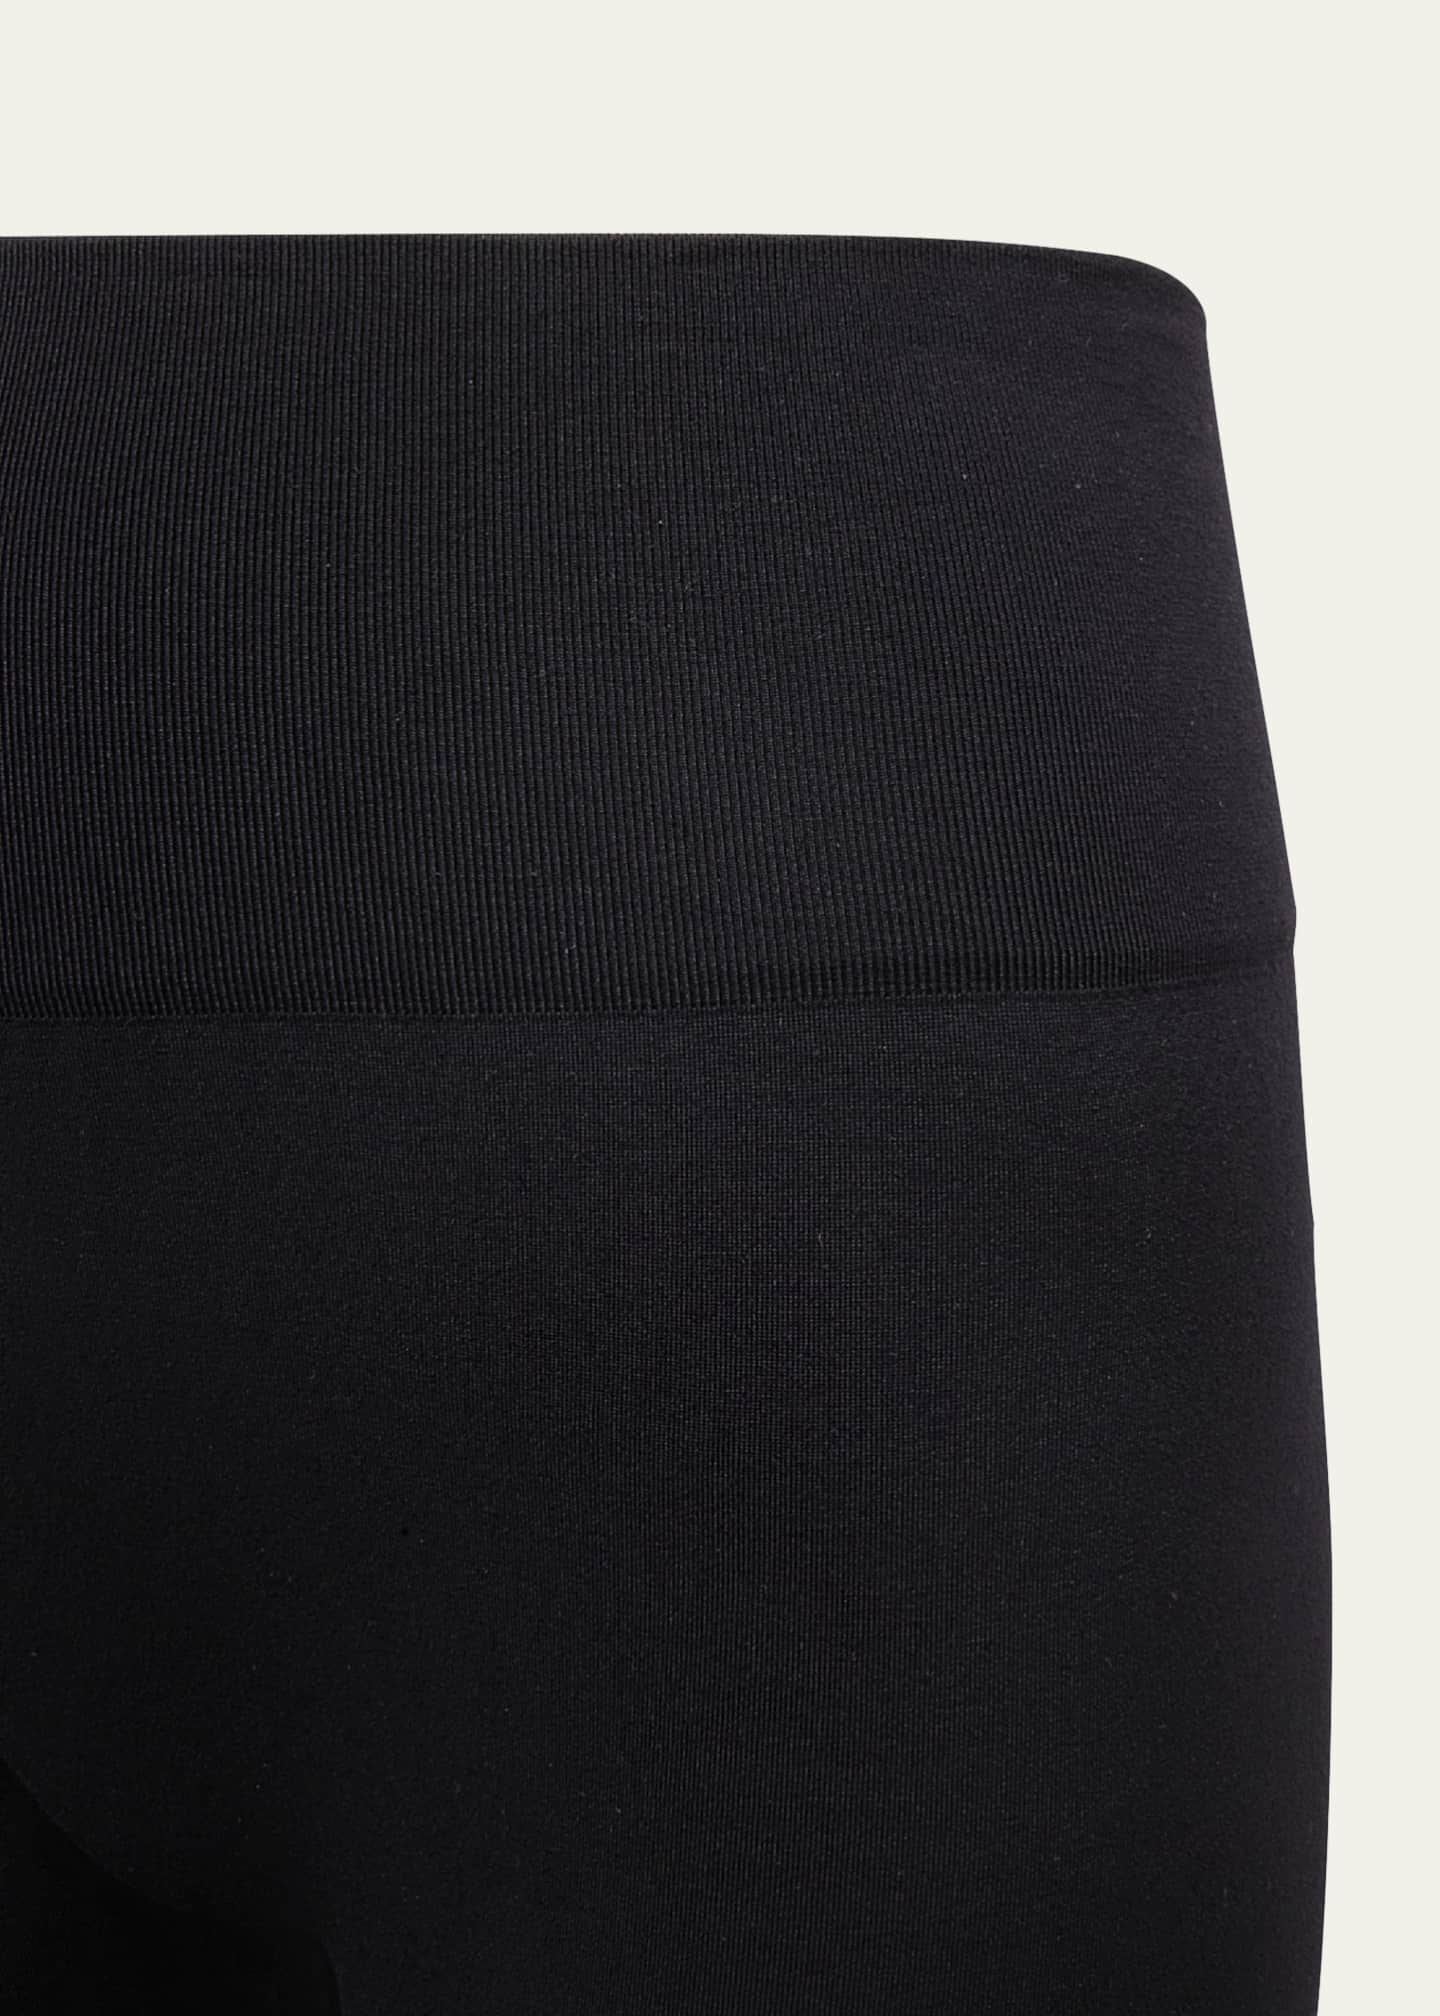 Wolford Perfect Fit Leggings, Black, S